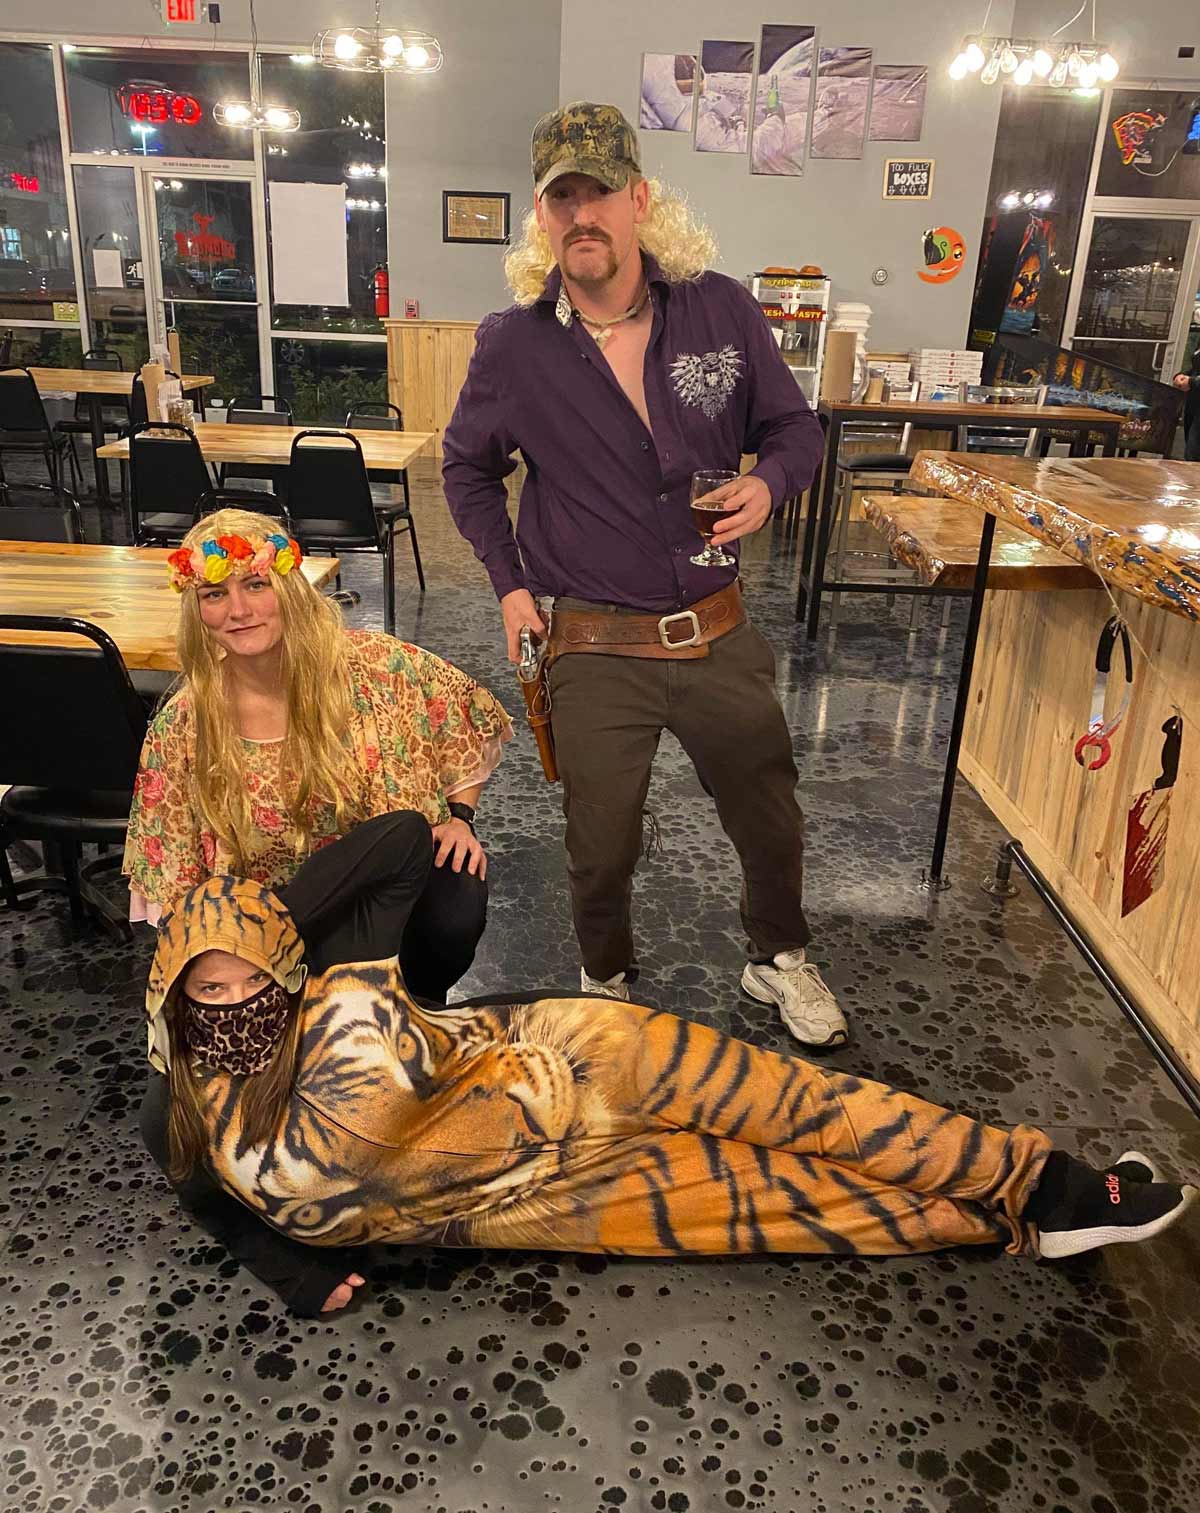 I was working in my tiger onesie on Halloween when customers came in as Joe Exotic and Carole Baskin